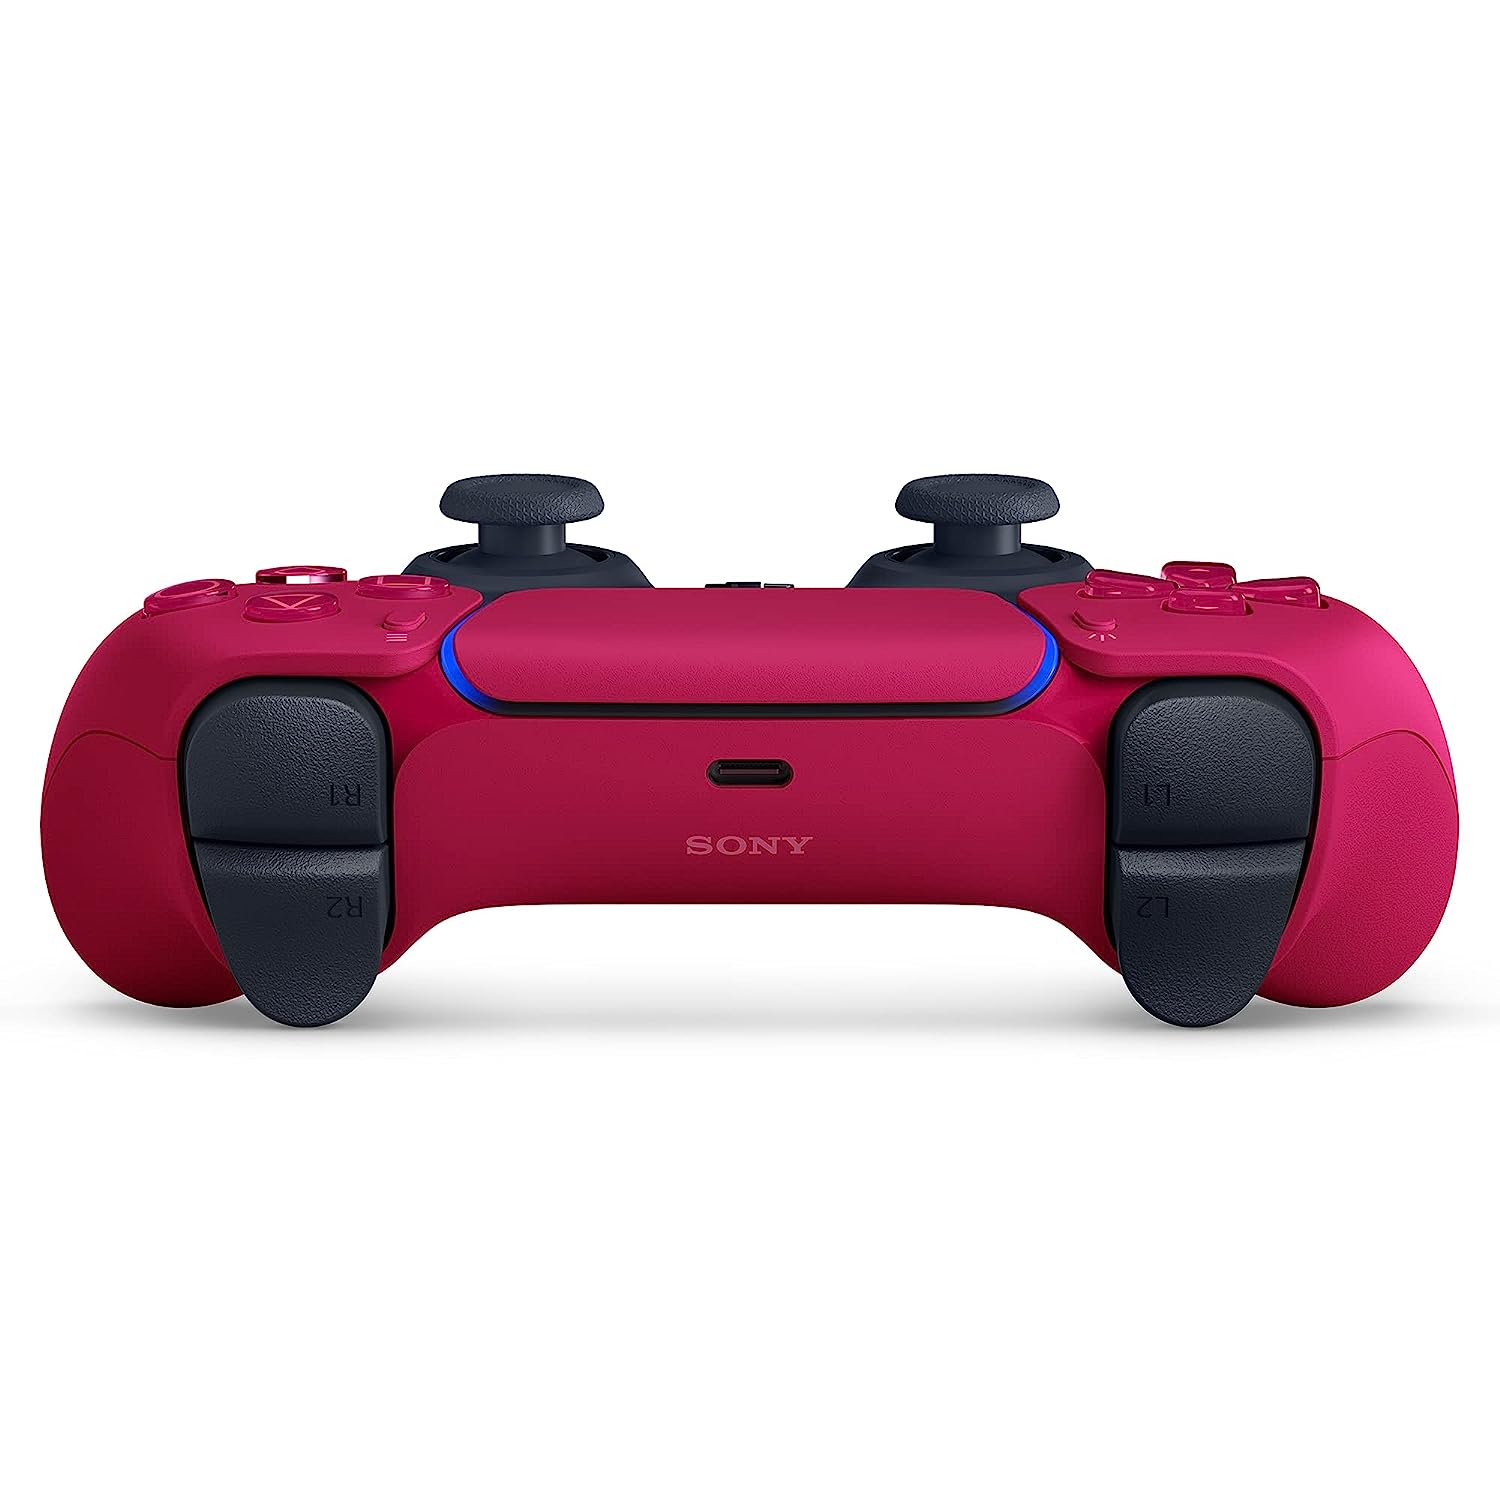 Sony Playstation 5 DualSense Wireless Controller - Cosmic Red (New)